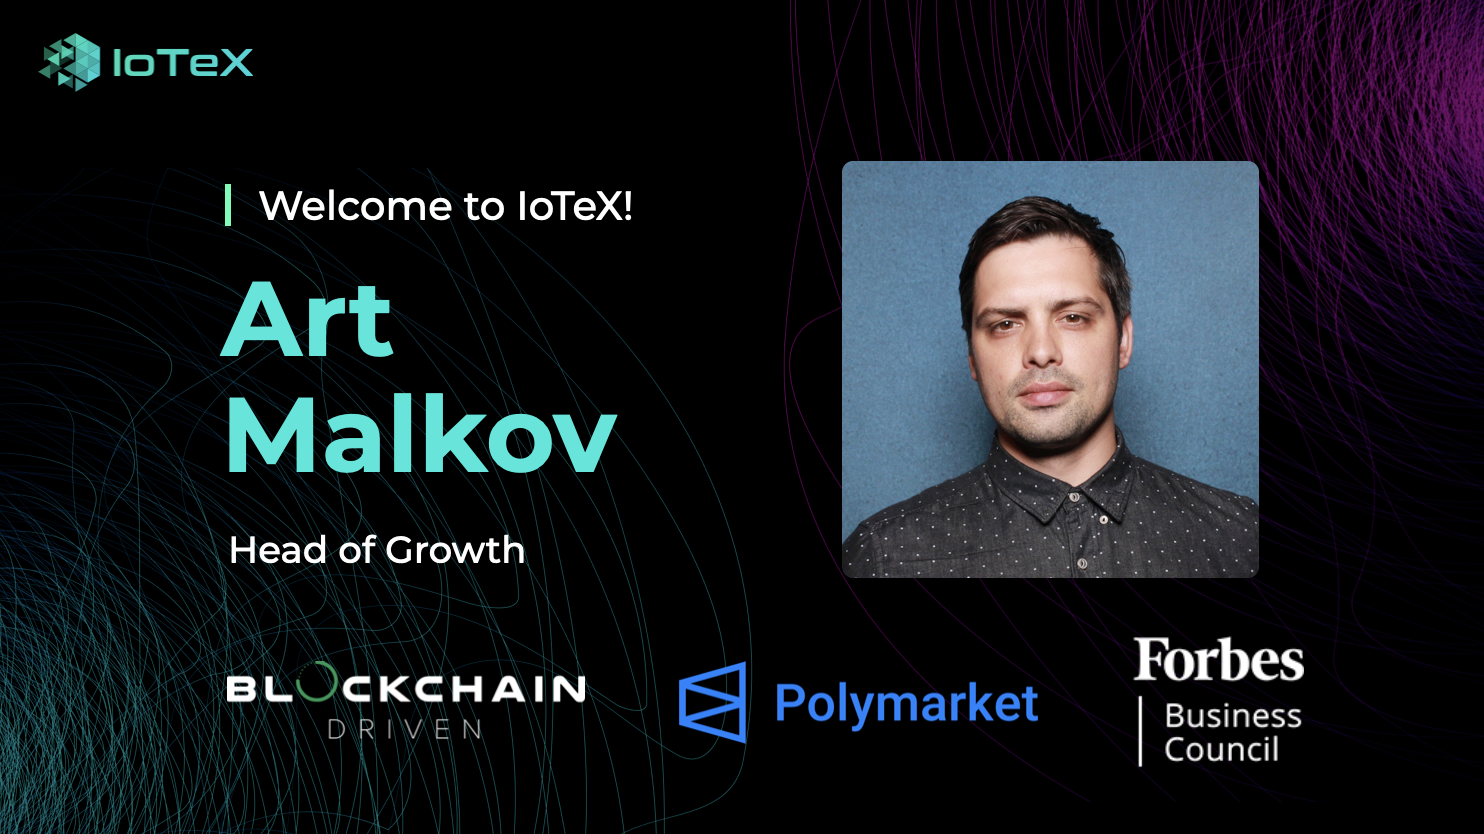 IoTeX Hires Art Malkov to Spearhead Marketing and Growth